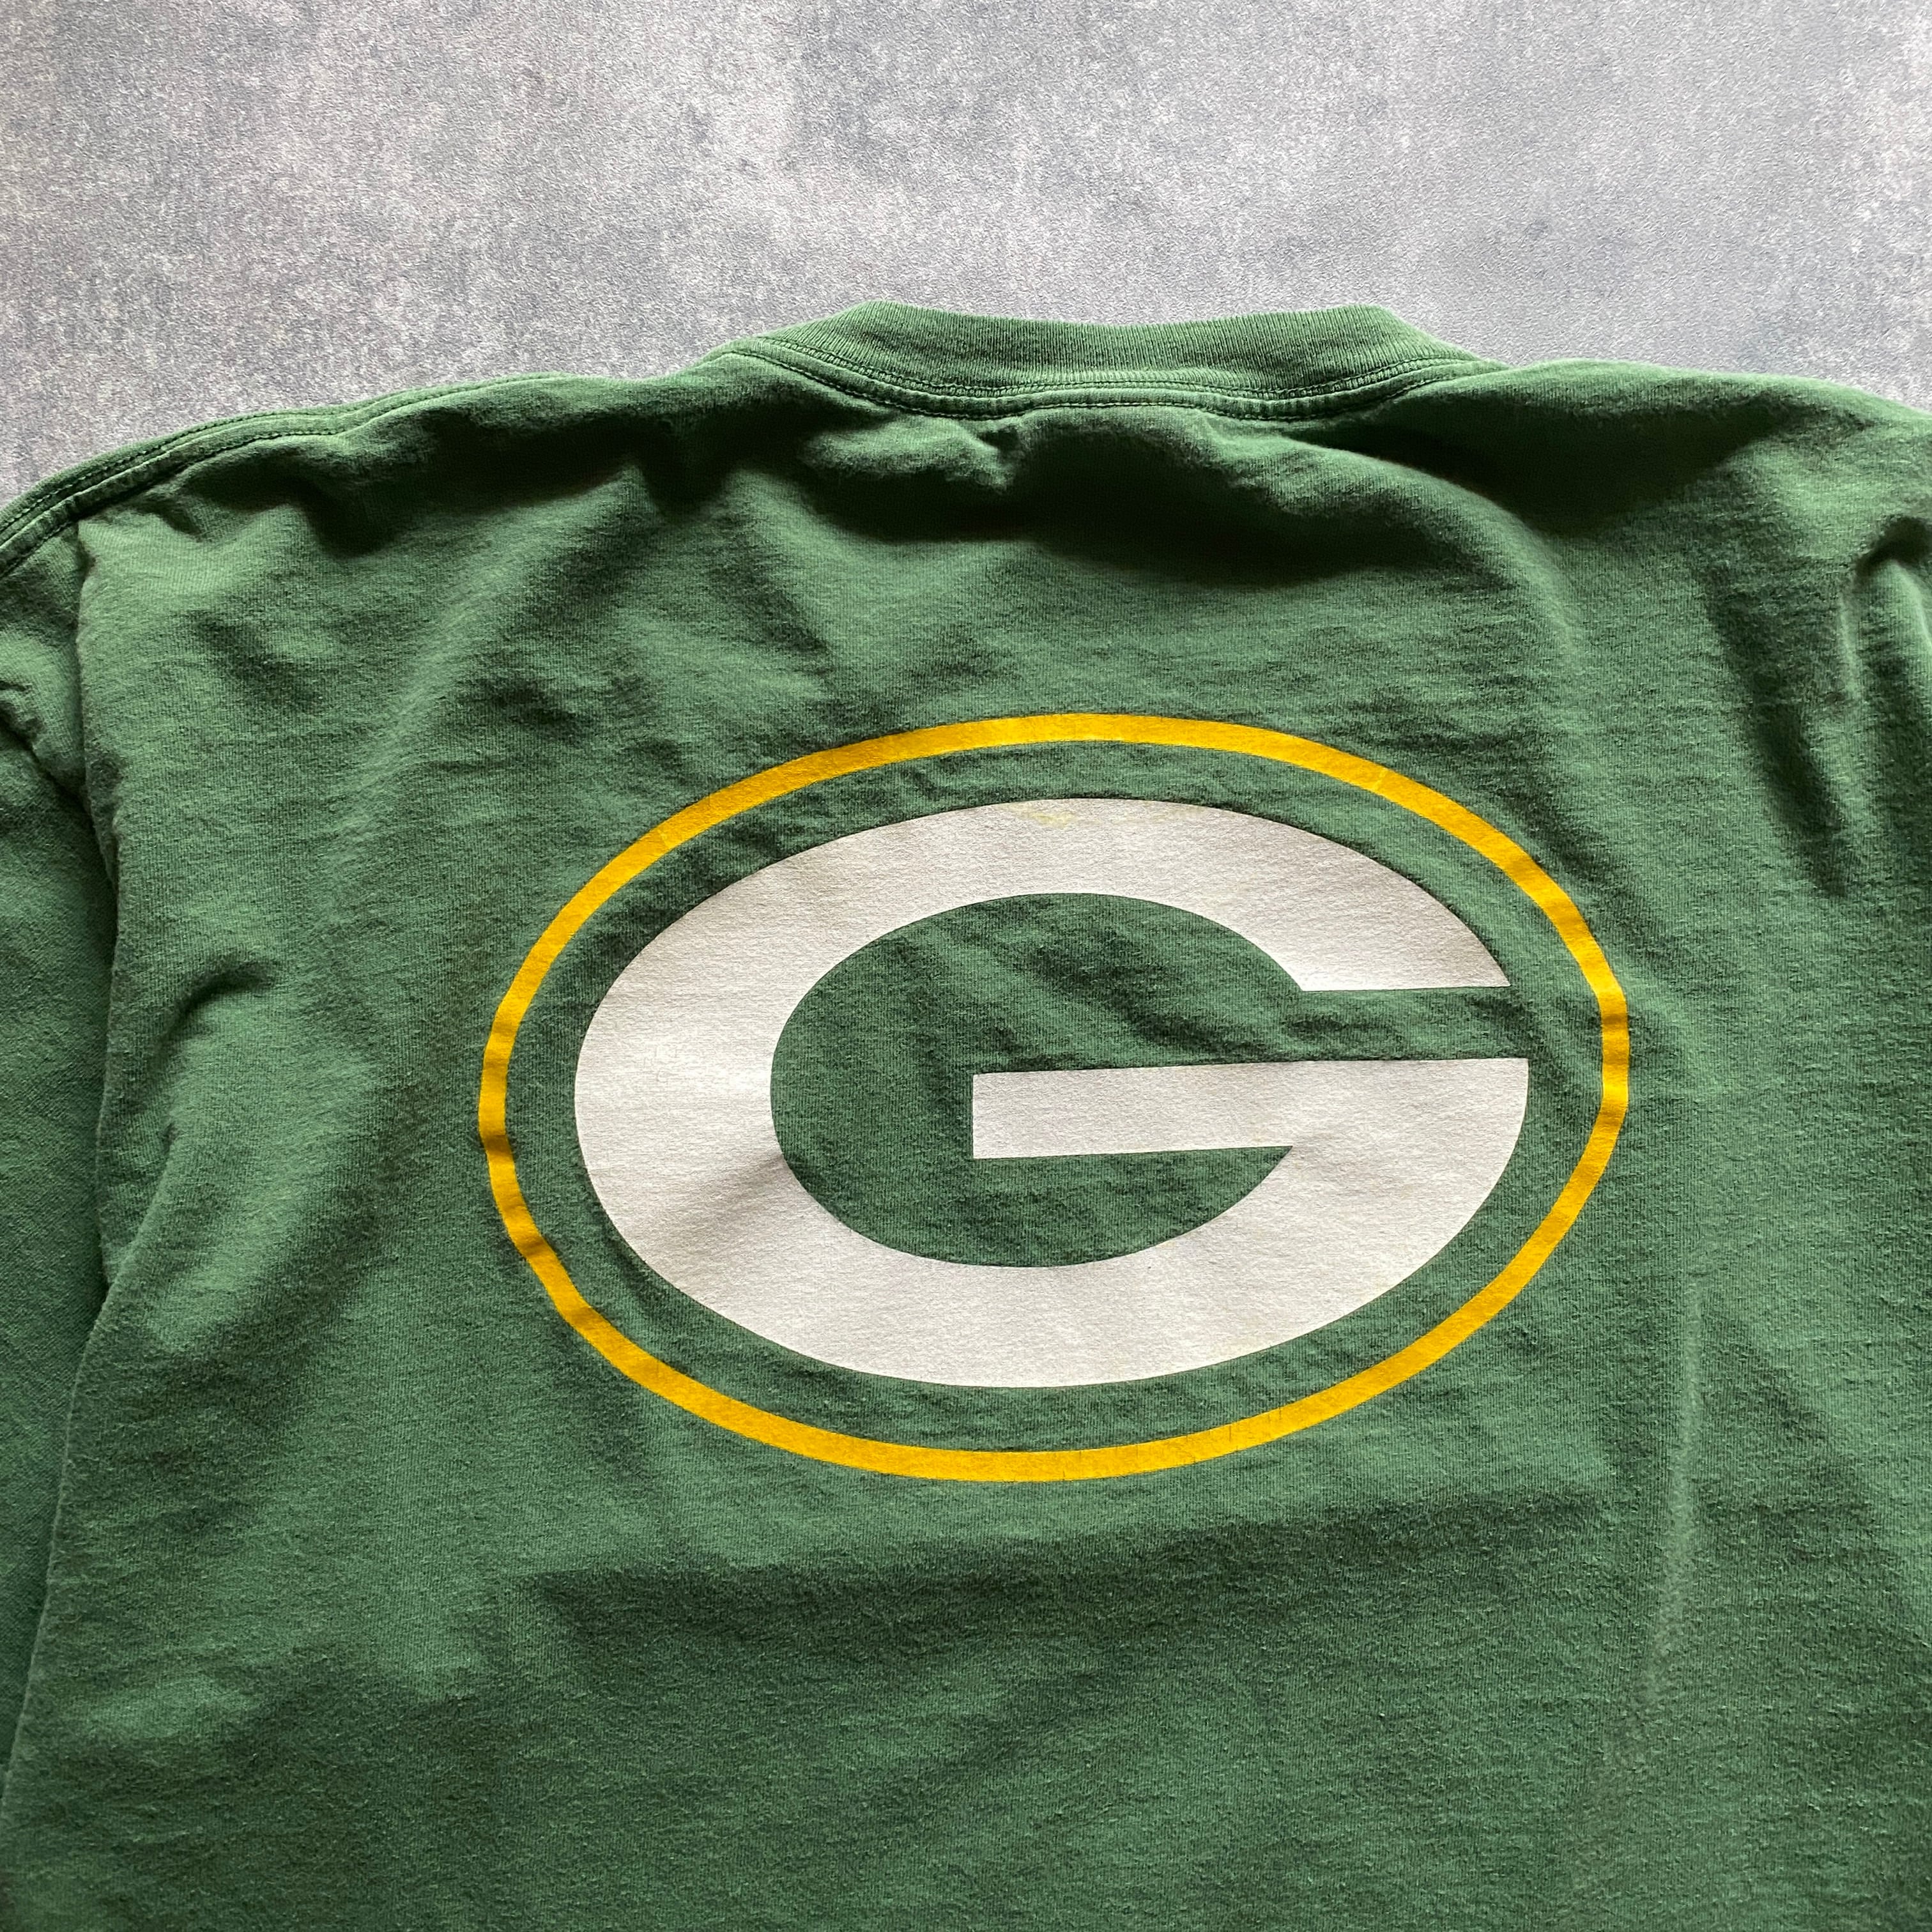 NIKE×PACKERS Tシャツ